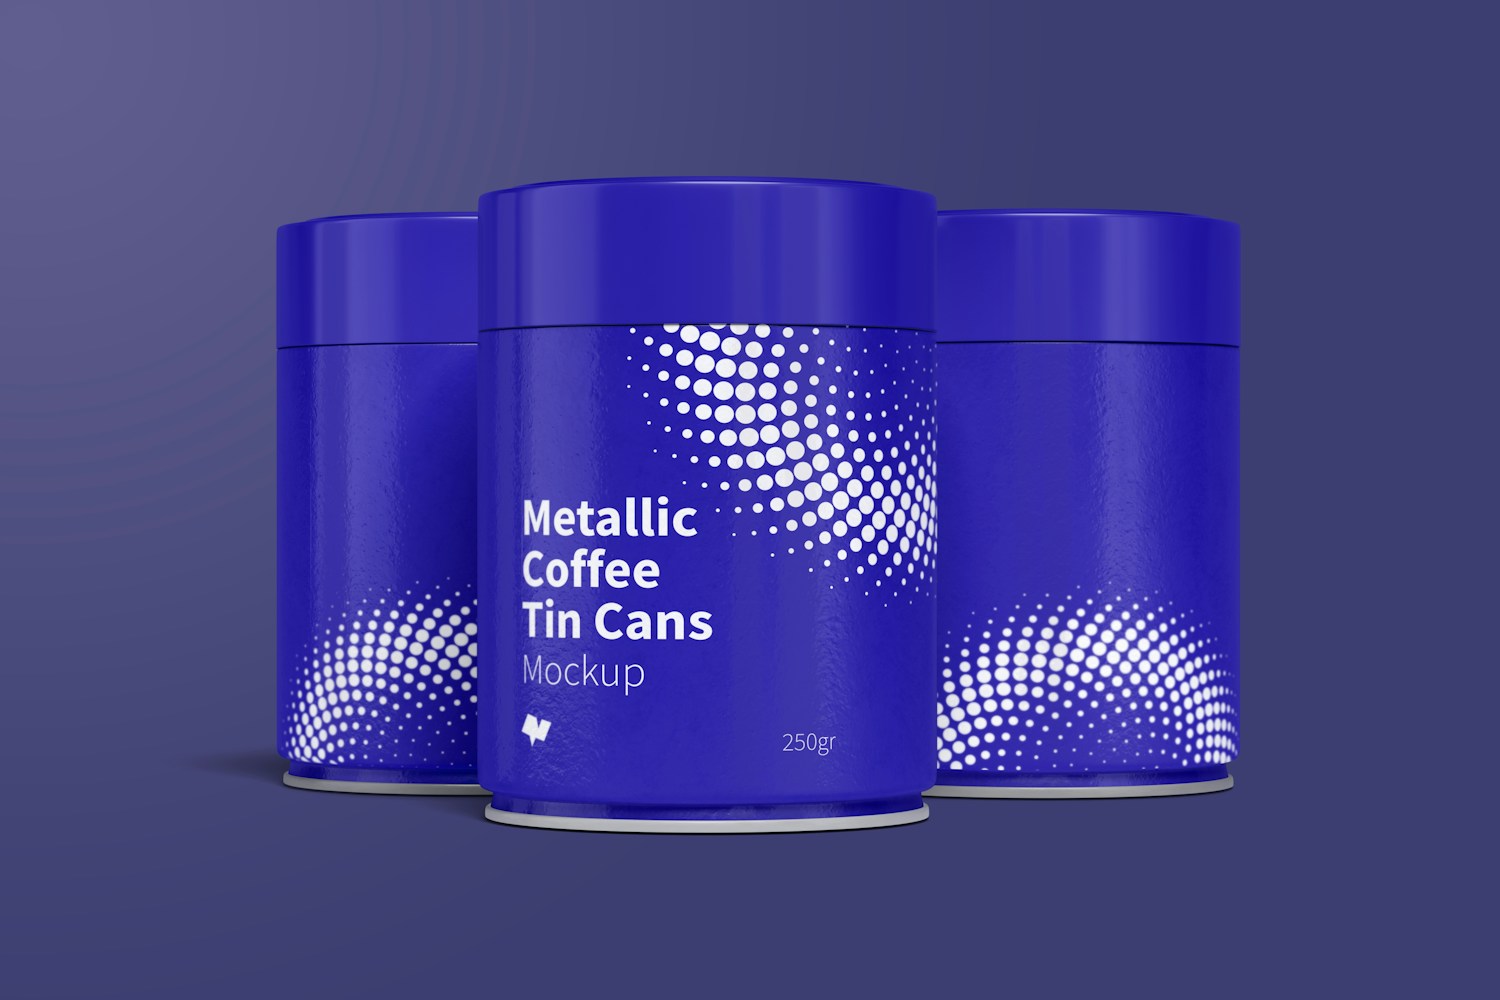 Metallic Coffee Tin Cans with Plastic Lids Mockup, Closed Set